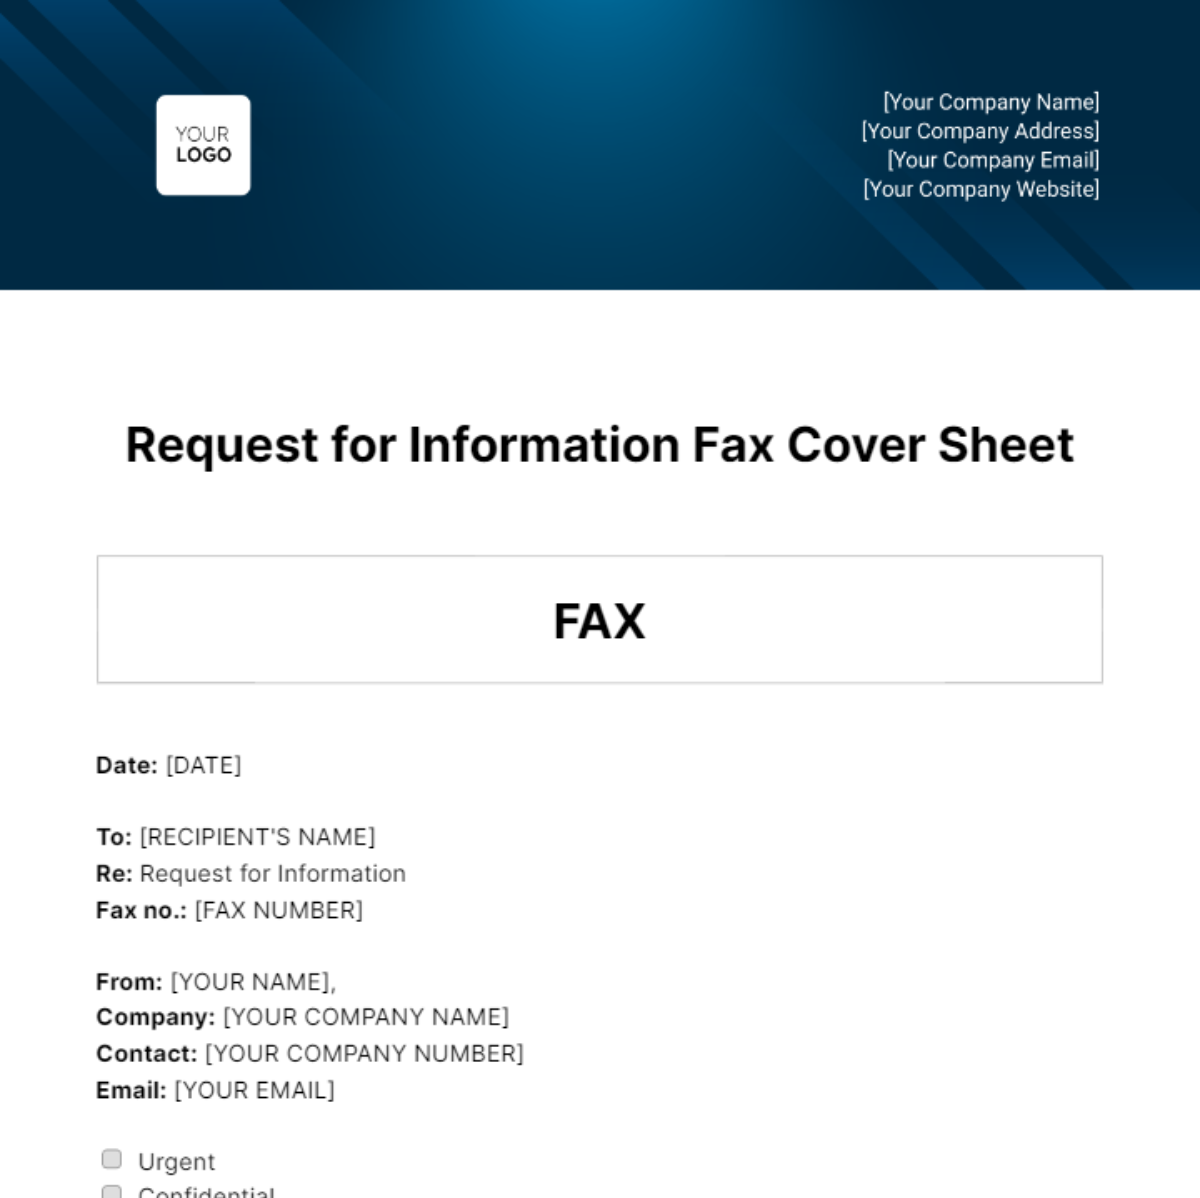 Request for Information Fax Cover Sheet Template